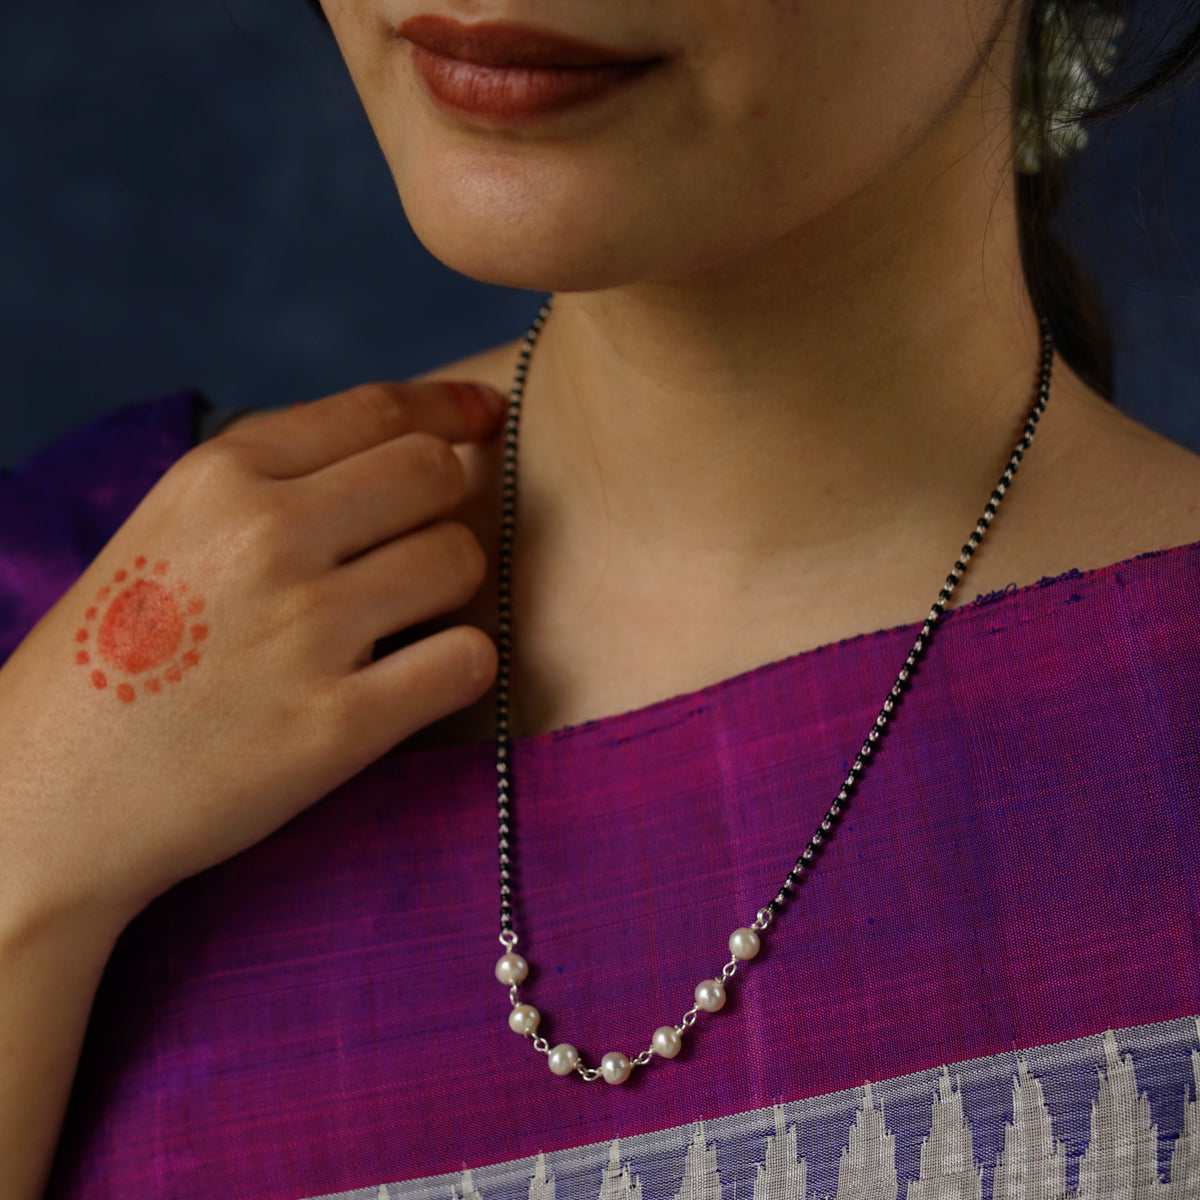 a woman wearing a necklace with a red dot on it